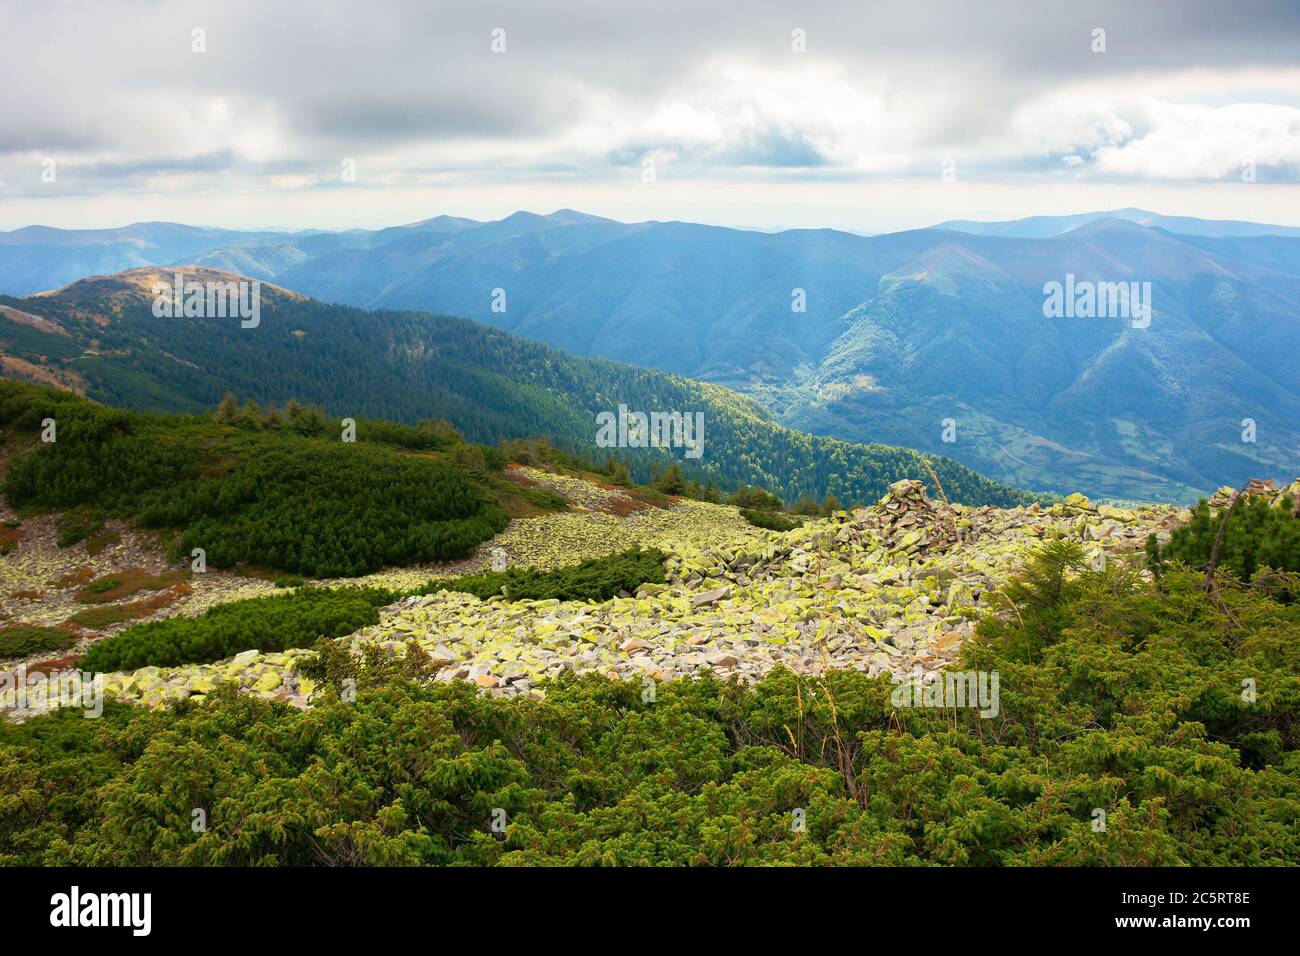 mountain landscape with green stones. juniper tree among the rocks and grass. dramatic nature scenery on a cloudy day. great view in to the distant kr Stock Photo